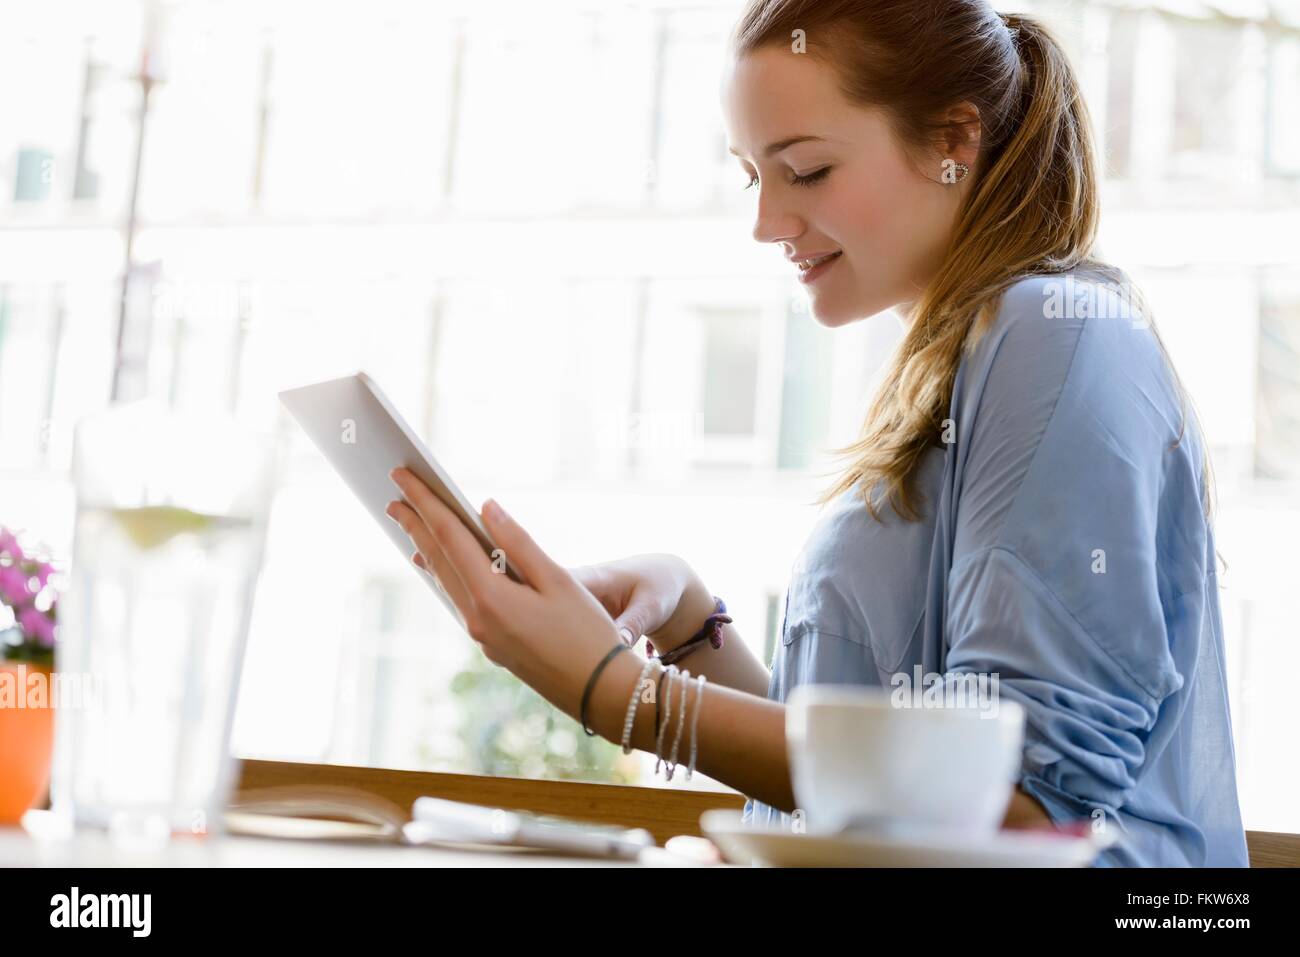 Side view of young woman in cafe looking down using digital tablet Stock Photo